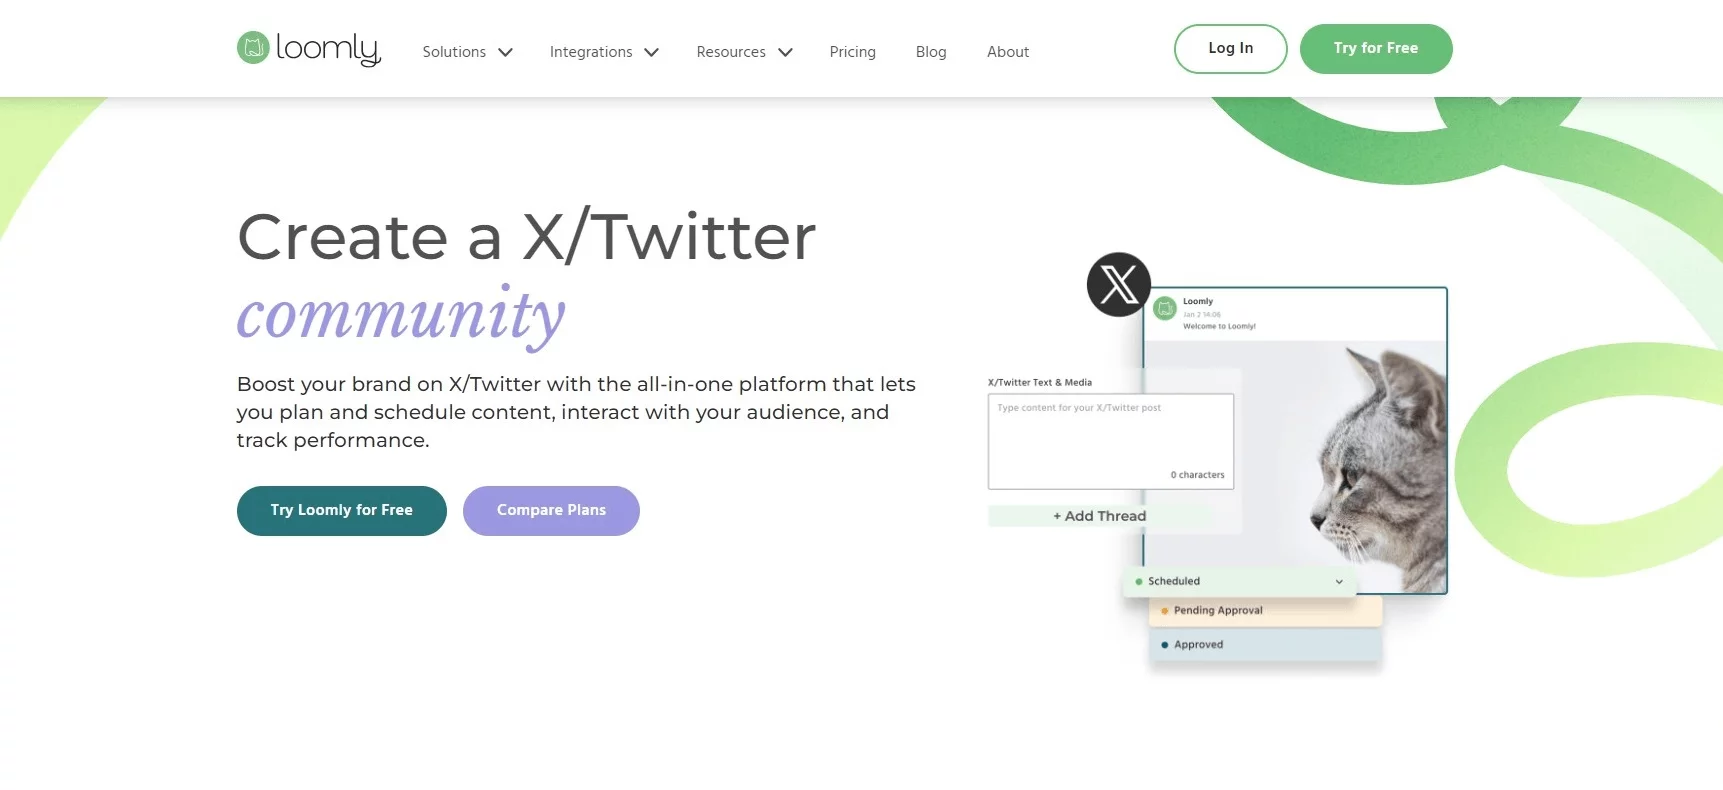 Loomly Twitter landing page for creating community